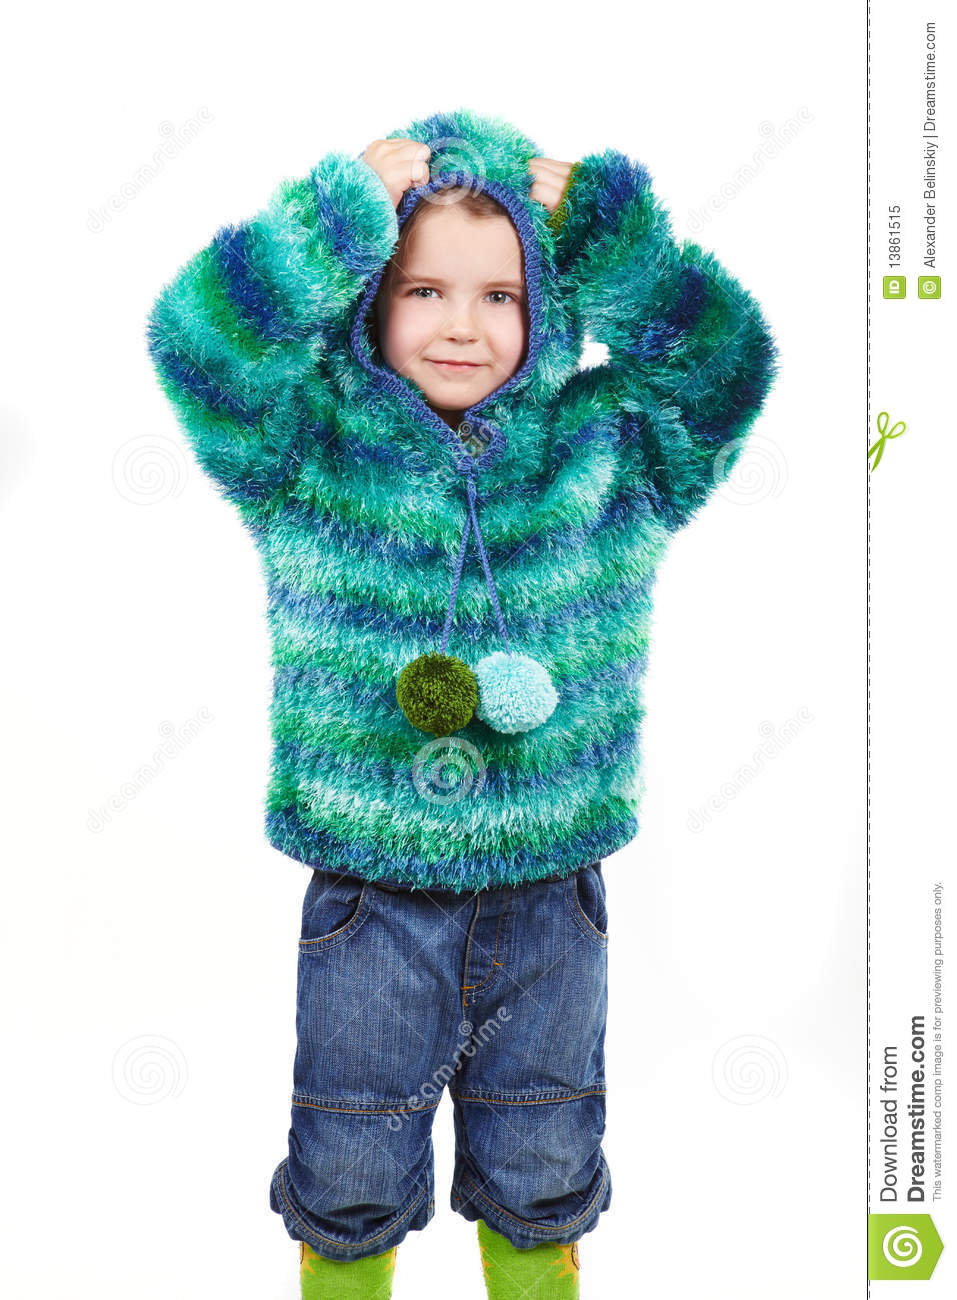 Little Girl In Fur Coat 2 Royalty Free Stock Photo   Image  13861515